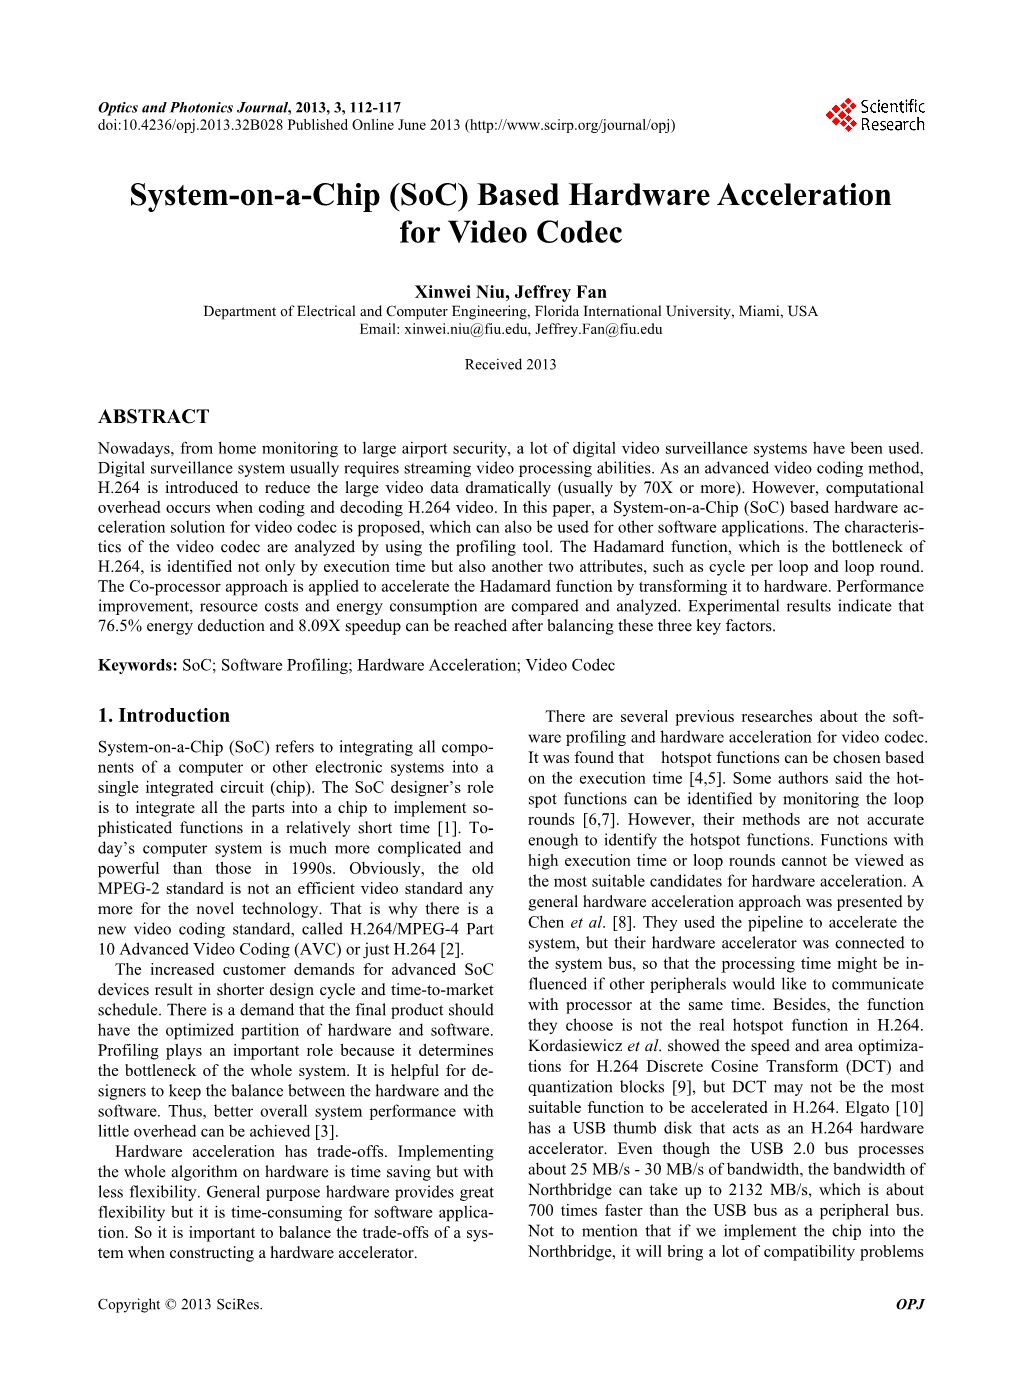 (Soc) Based Hardware Acceleration for Video Codec